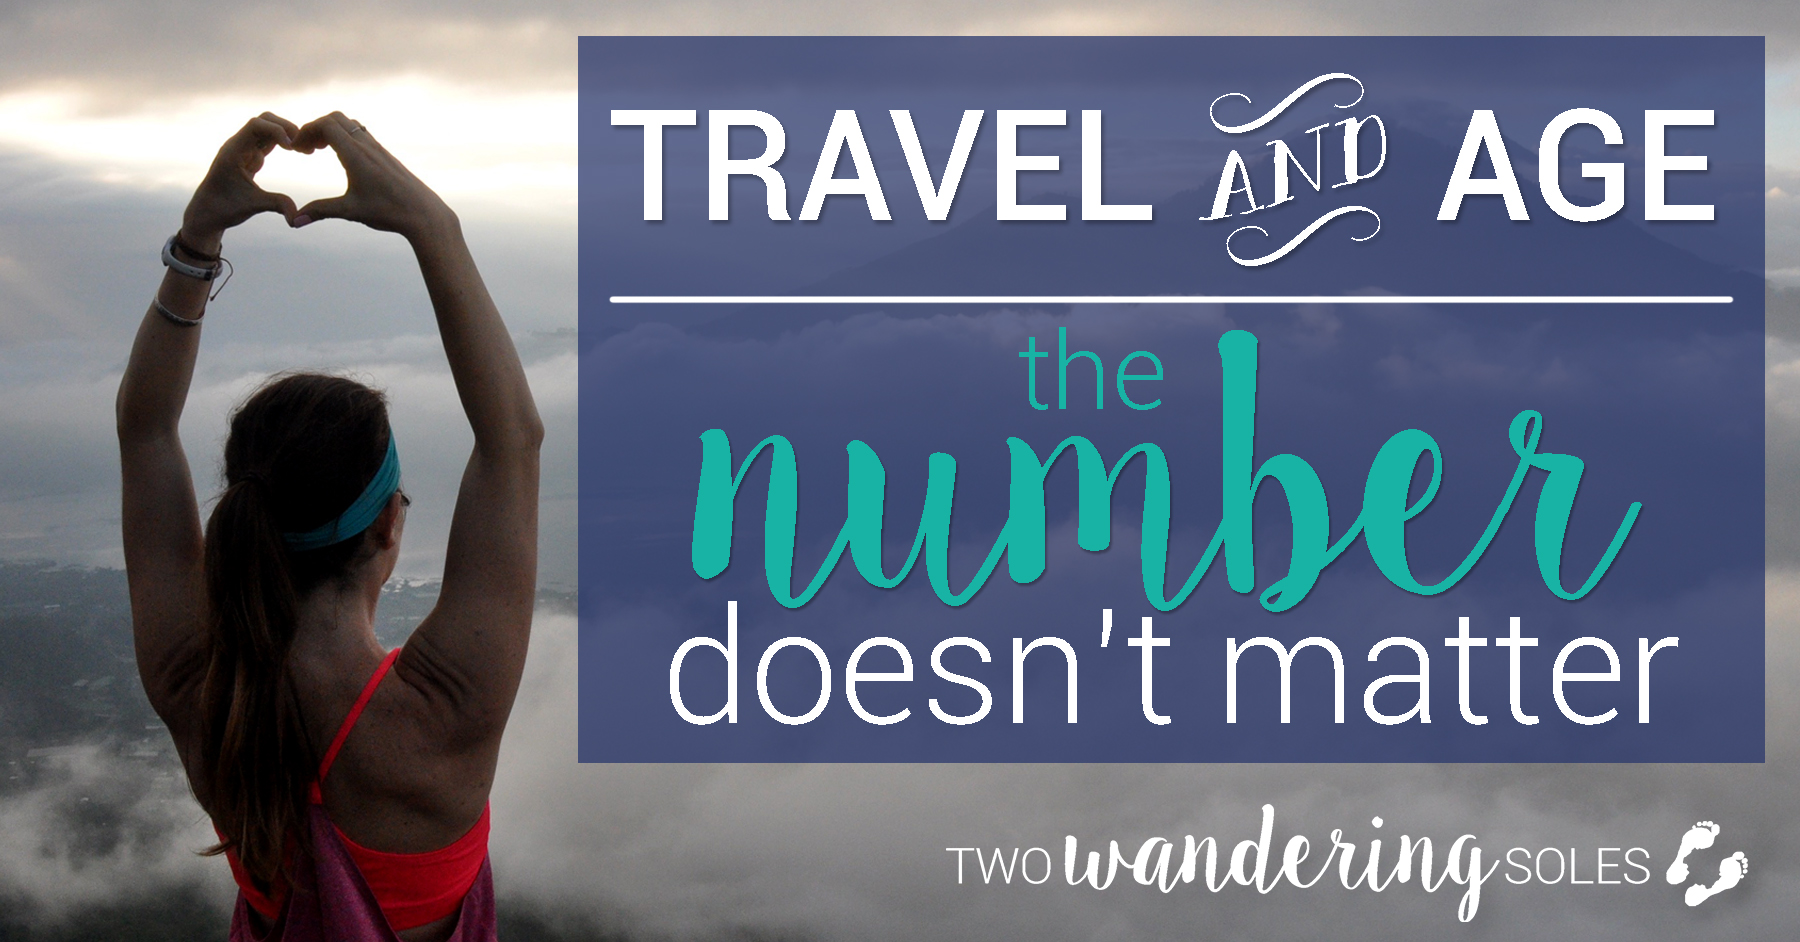 Travel & Age: The Number Doesn't Matter